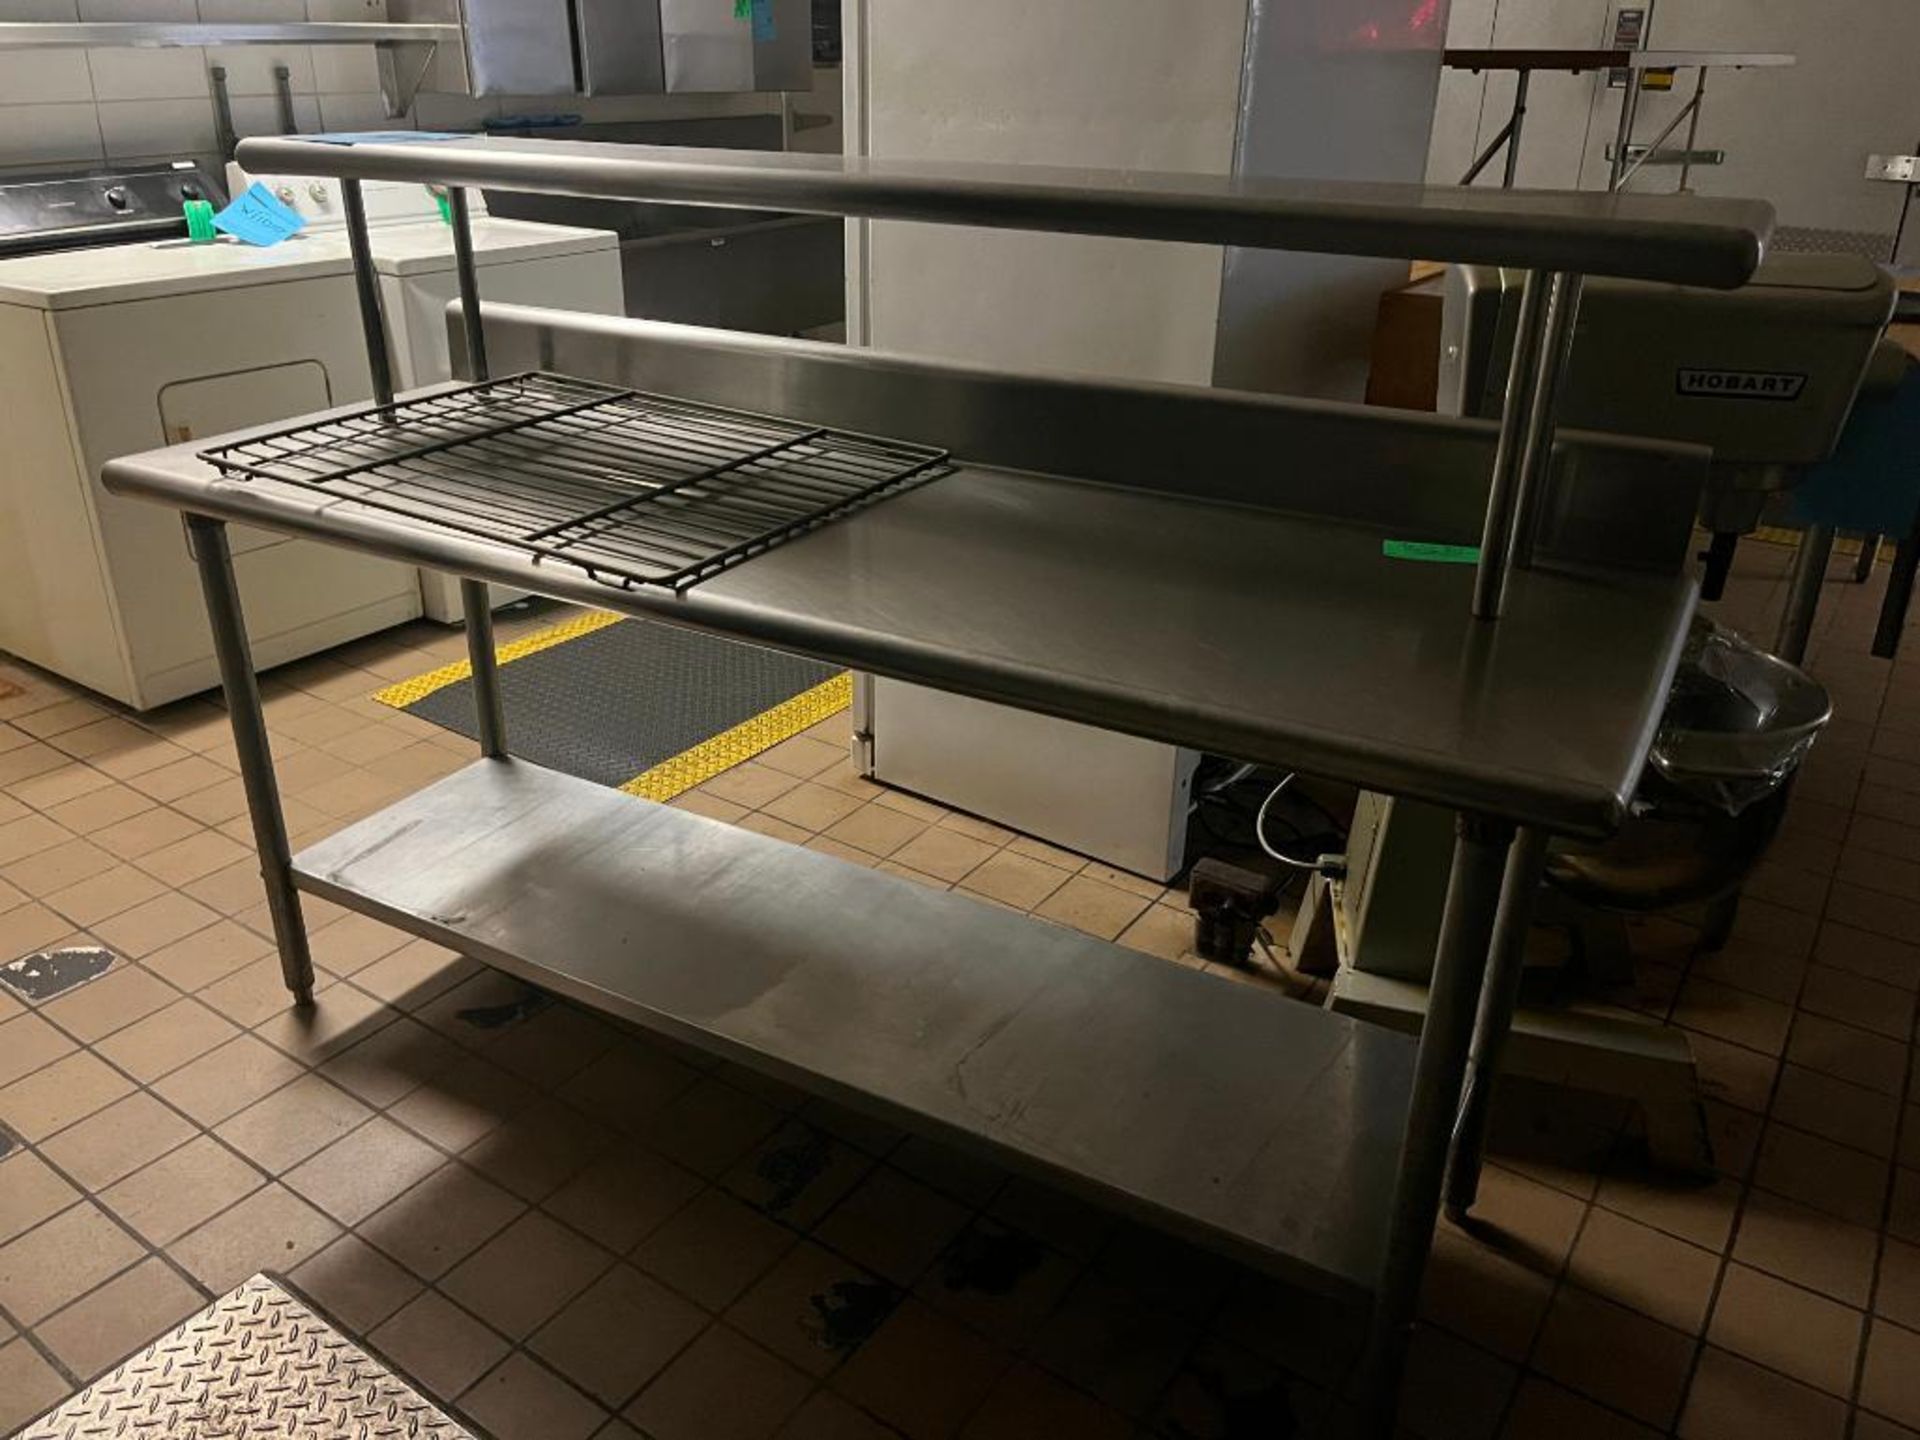 72" x 24" Stainless steel Prep Table